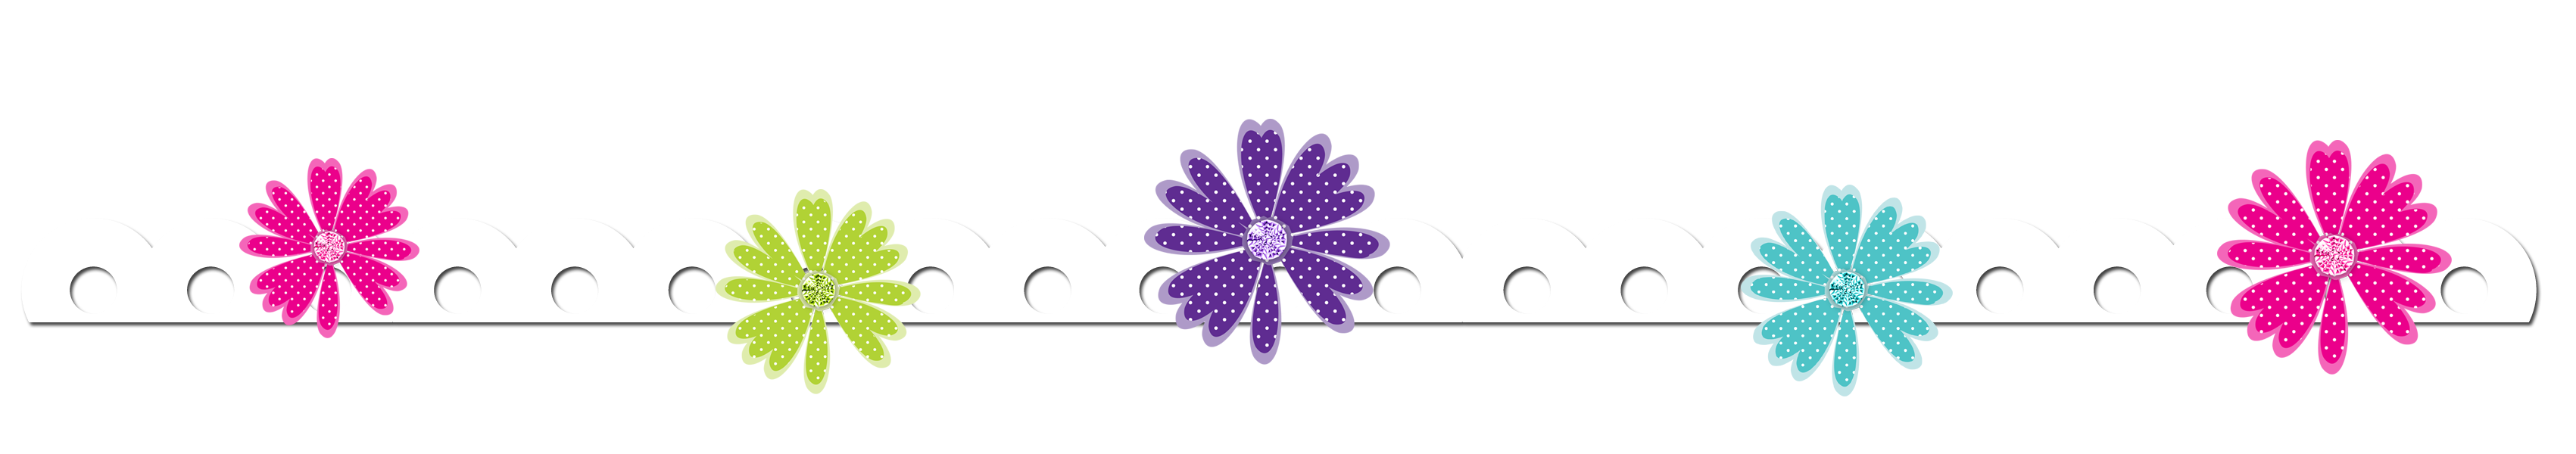 Flower border downloadable all things positively positive clipart image